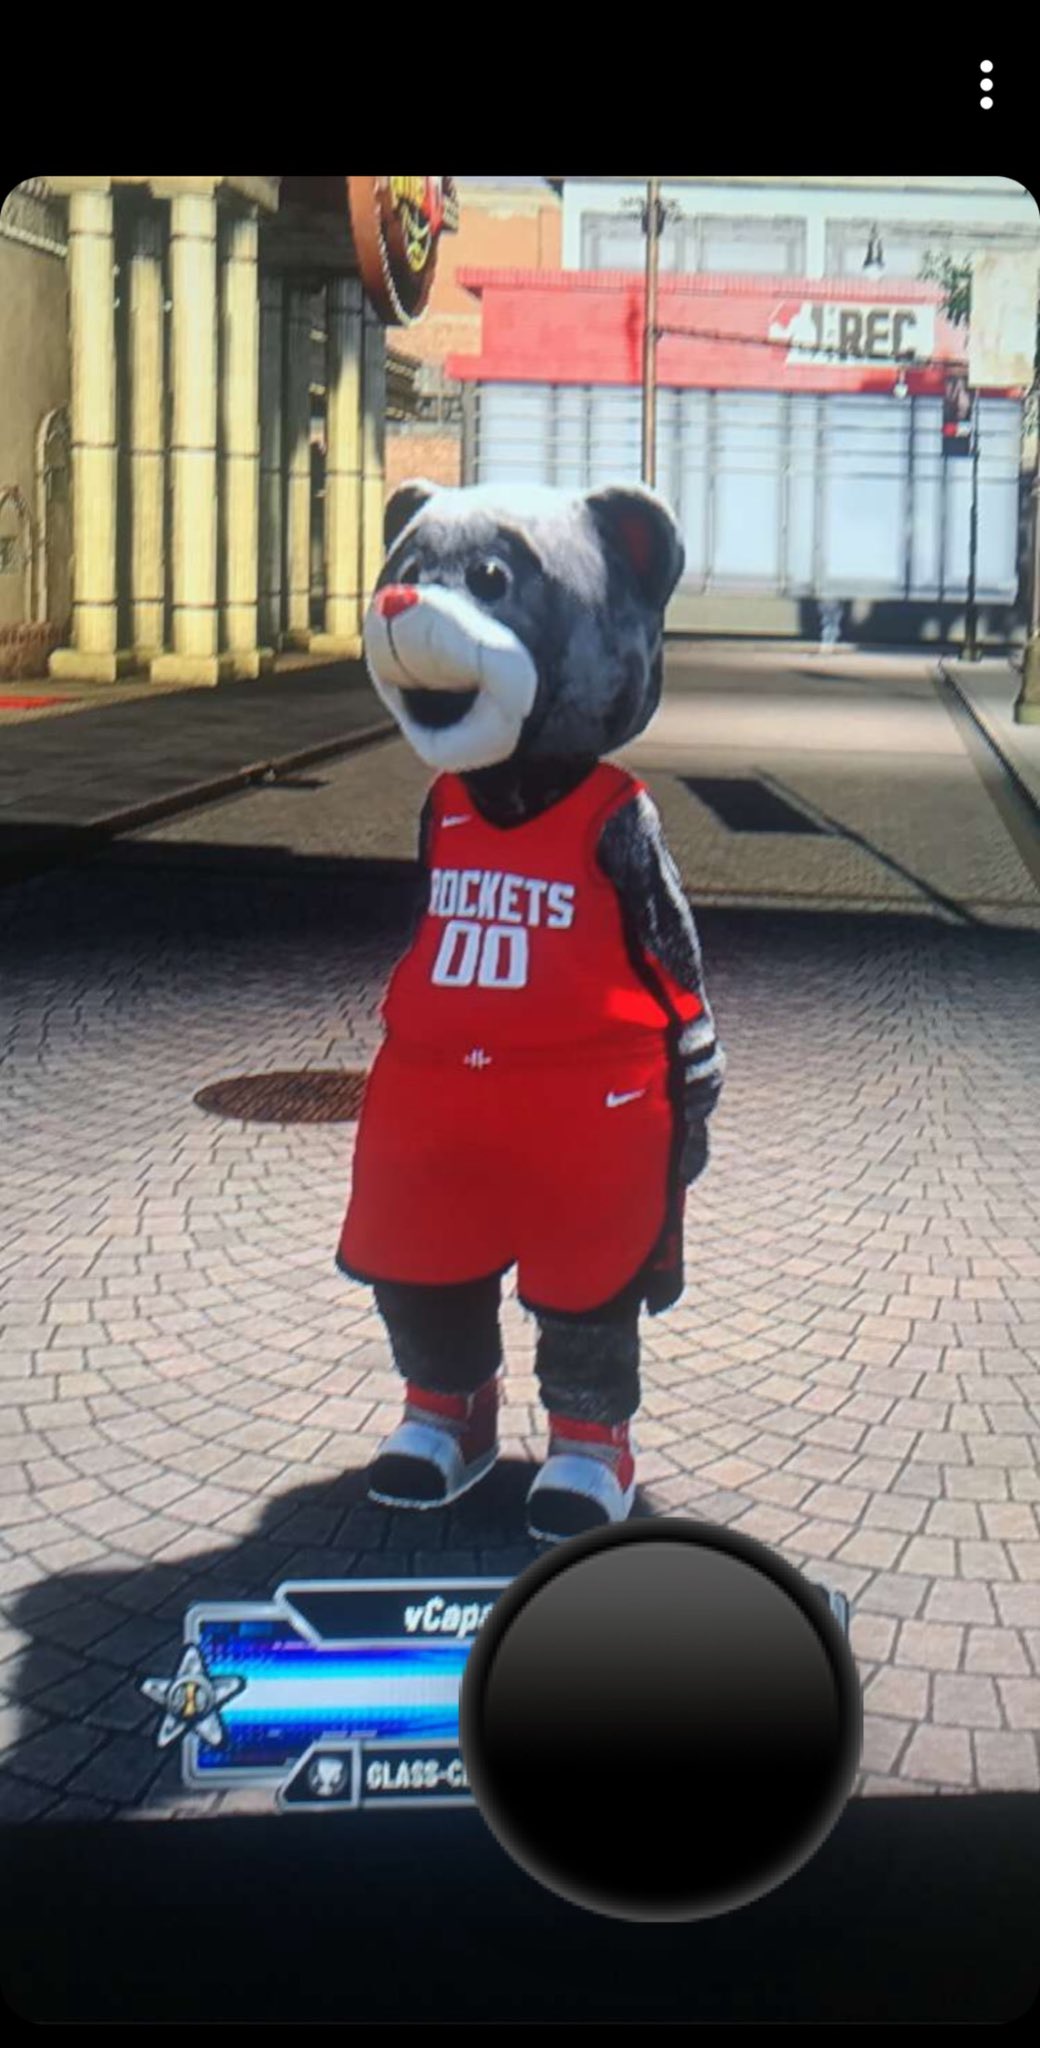 NBA 2k20 MASCOTS/EVENT CLOTHING on X: Rockets Mascot with E3 Pink Suit  with Ruffles and Gold rush for sale !!! #2k20mascot #2k20 #2k20Sale   / X